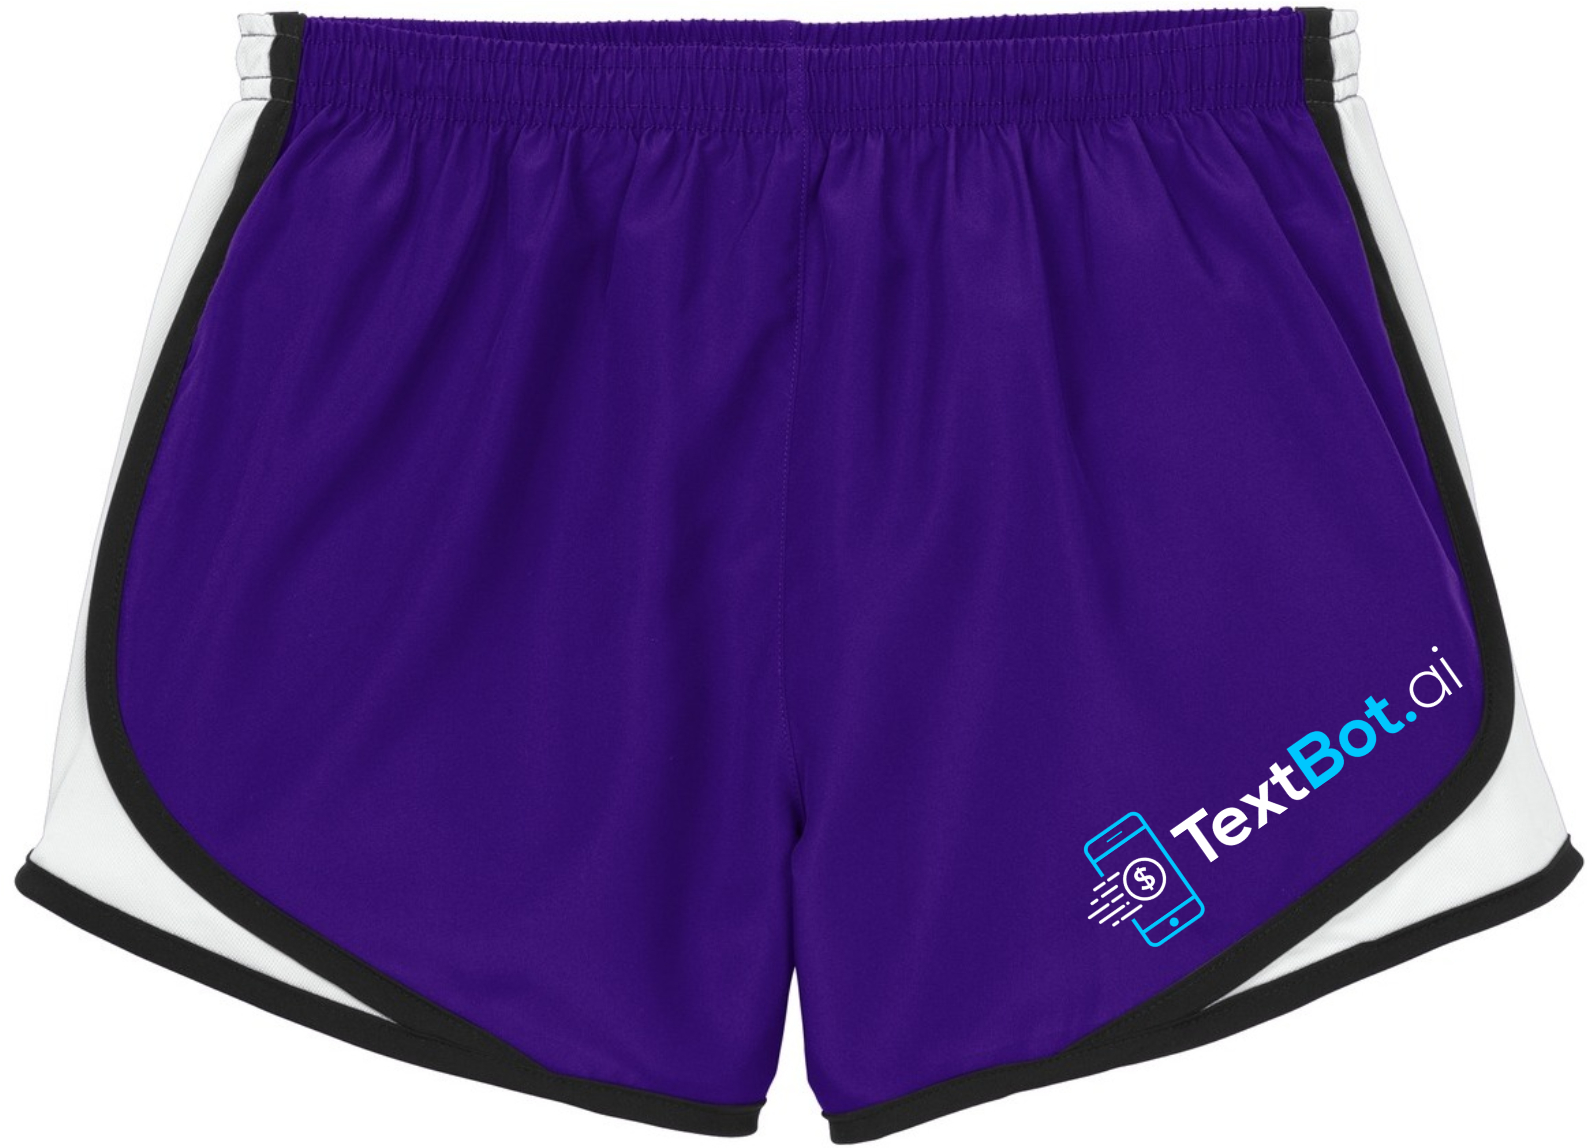 womens athletic shorts purp color logo